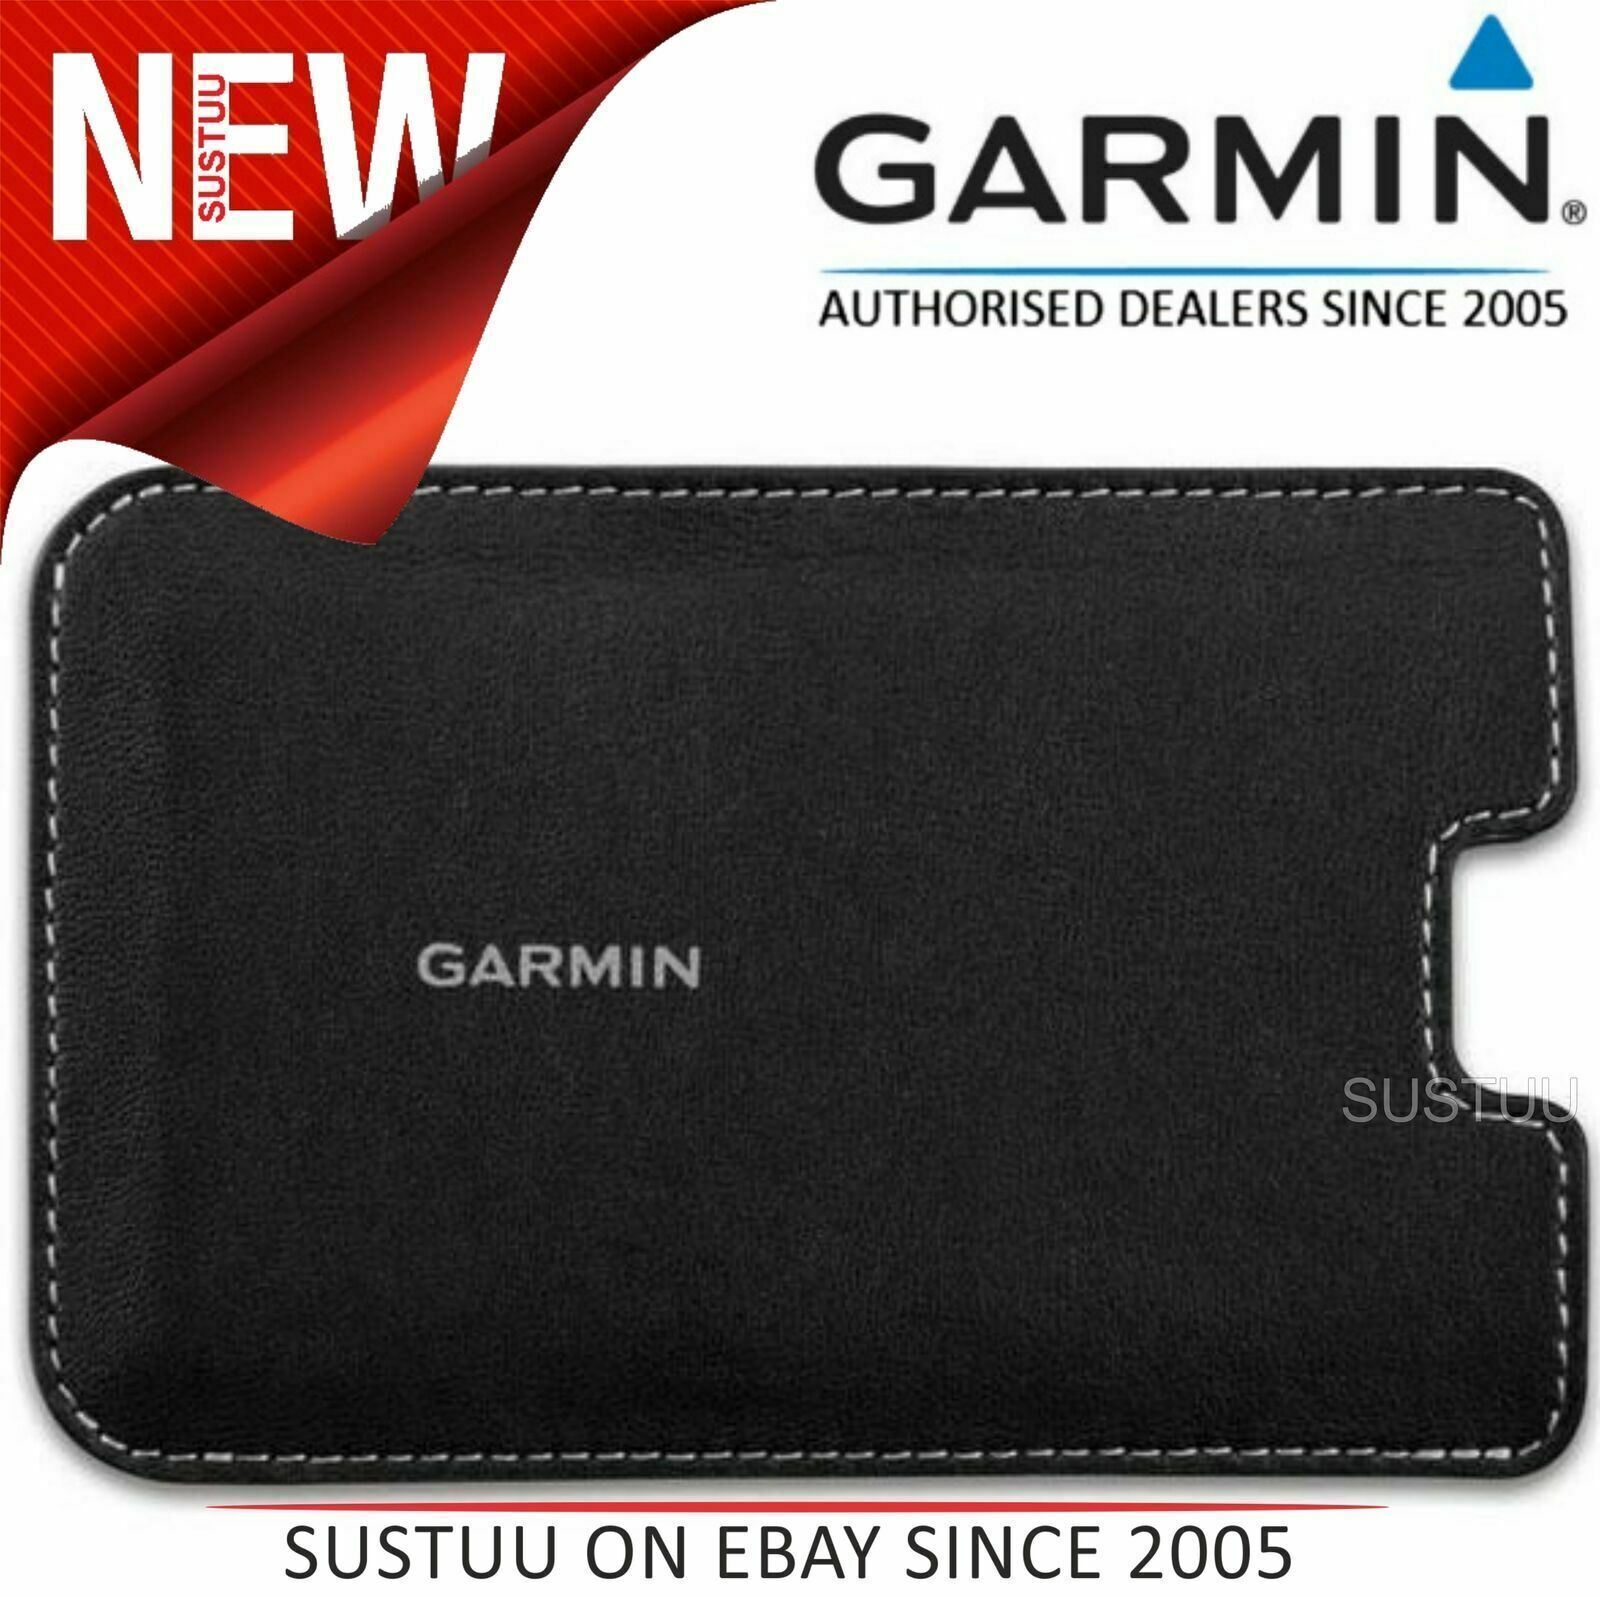 Garmin Universal 4.3 Carry Case/cover For Nuvi 3490lt/3710/3760t/3790t Gps